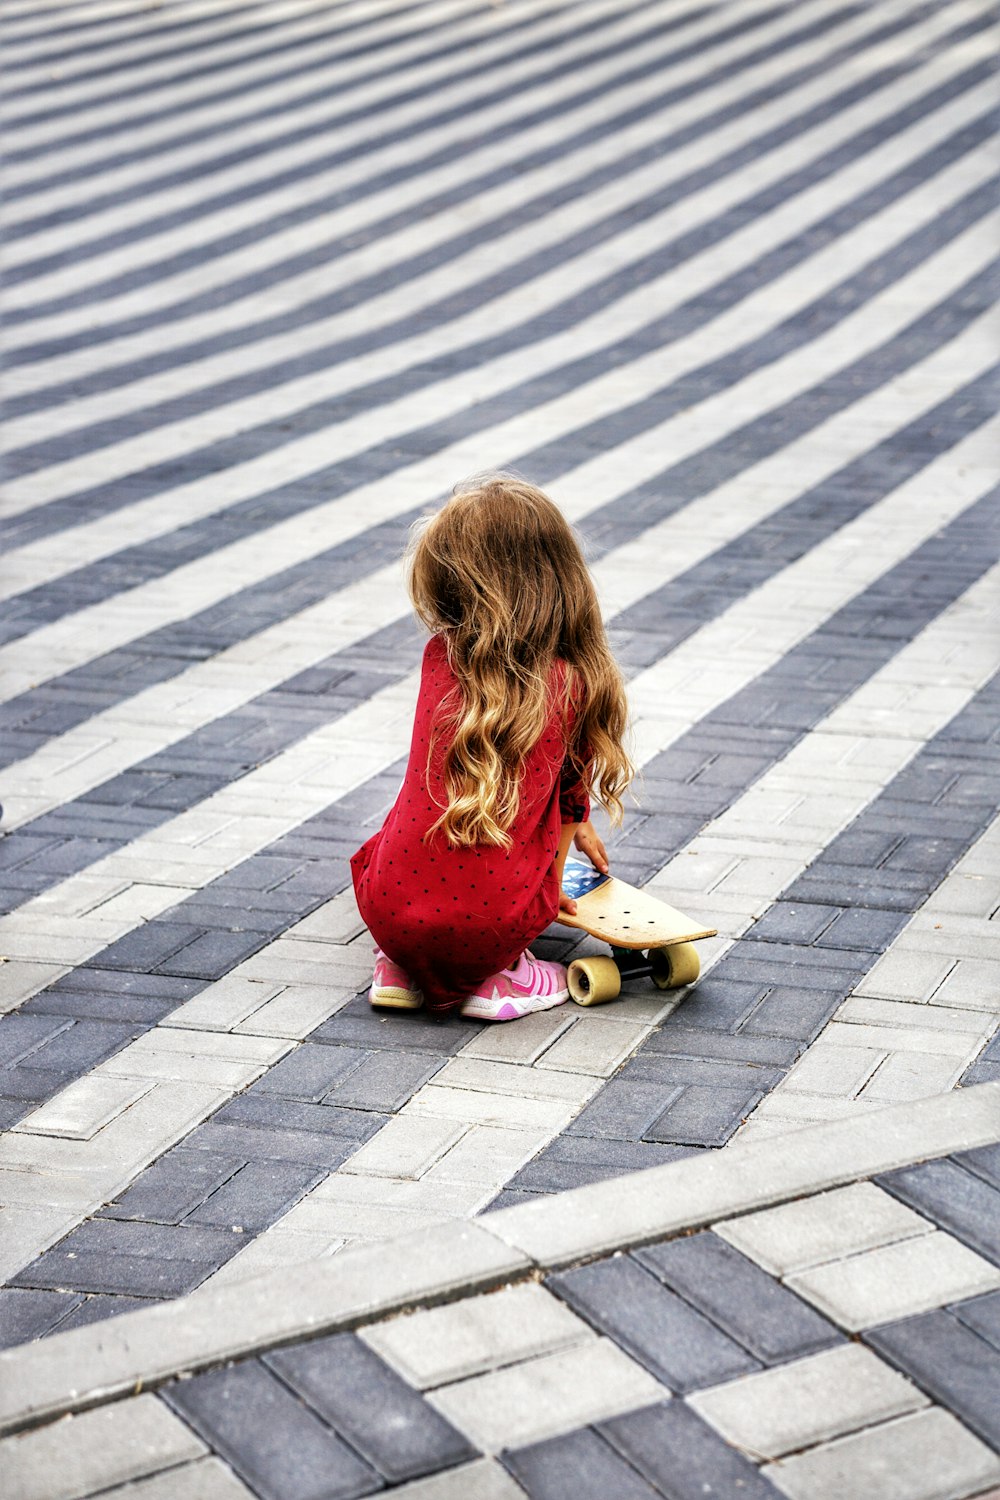 a little girl sitting on the ground with a skateboard